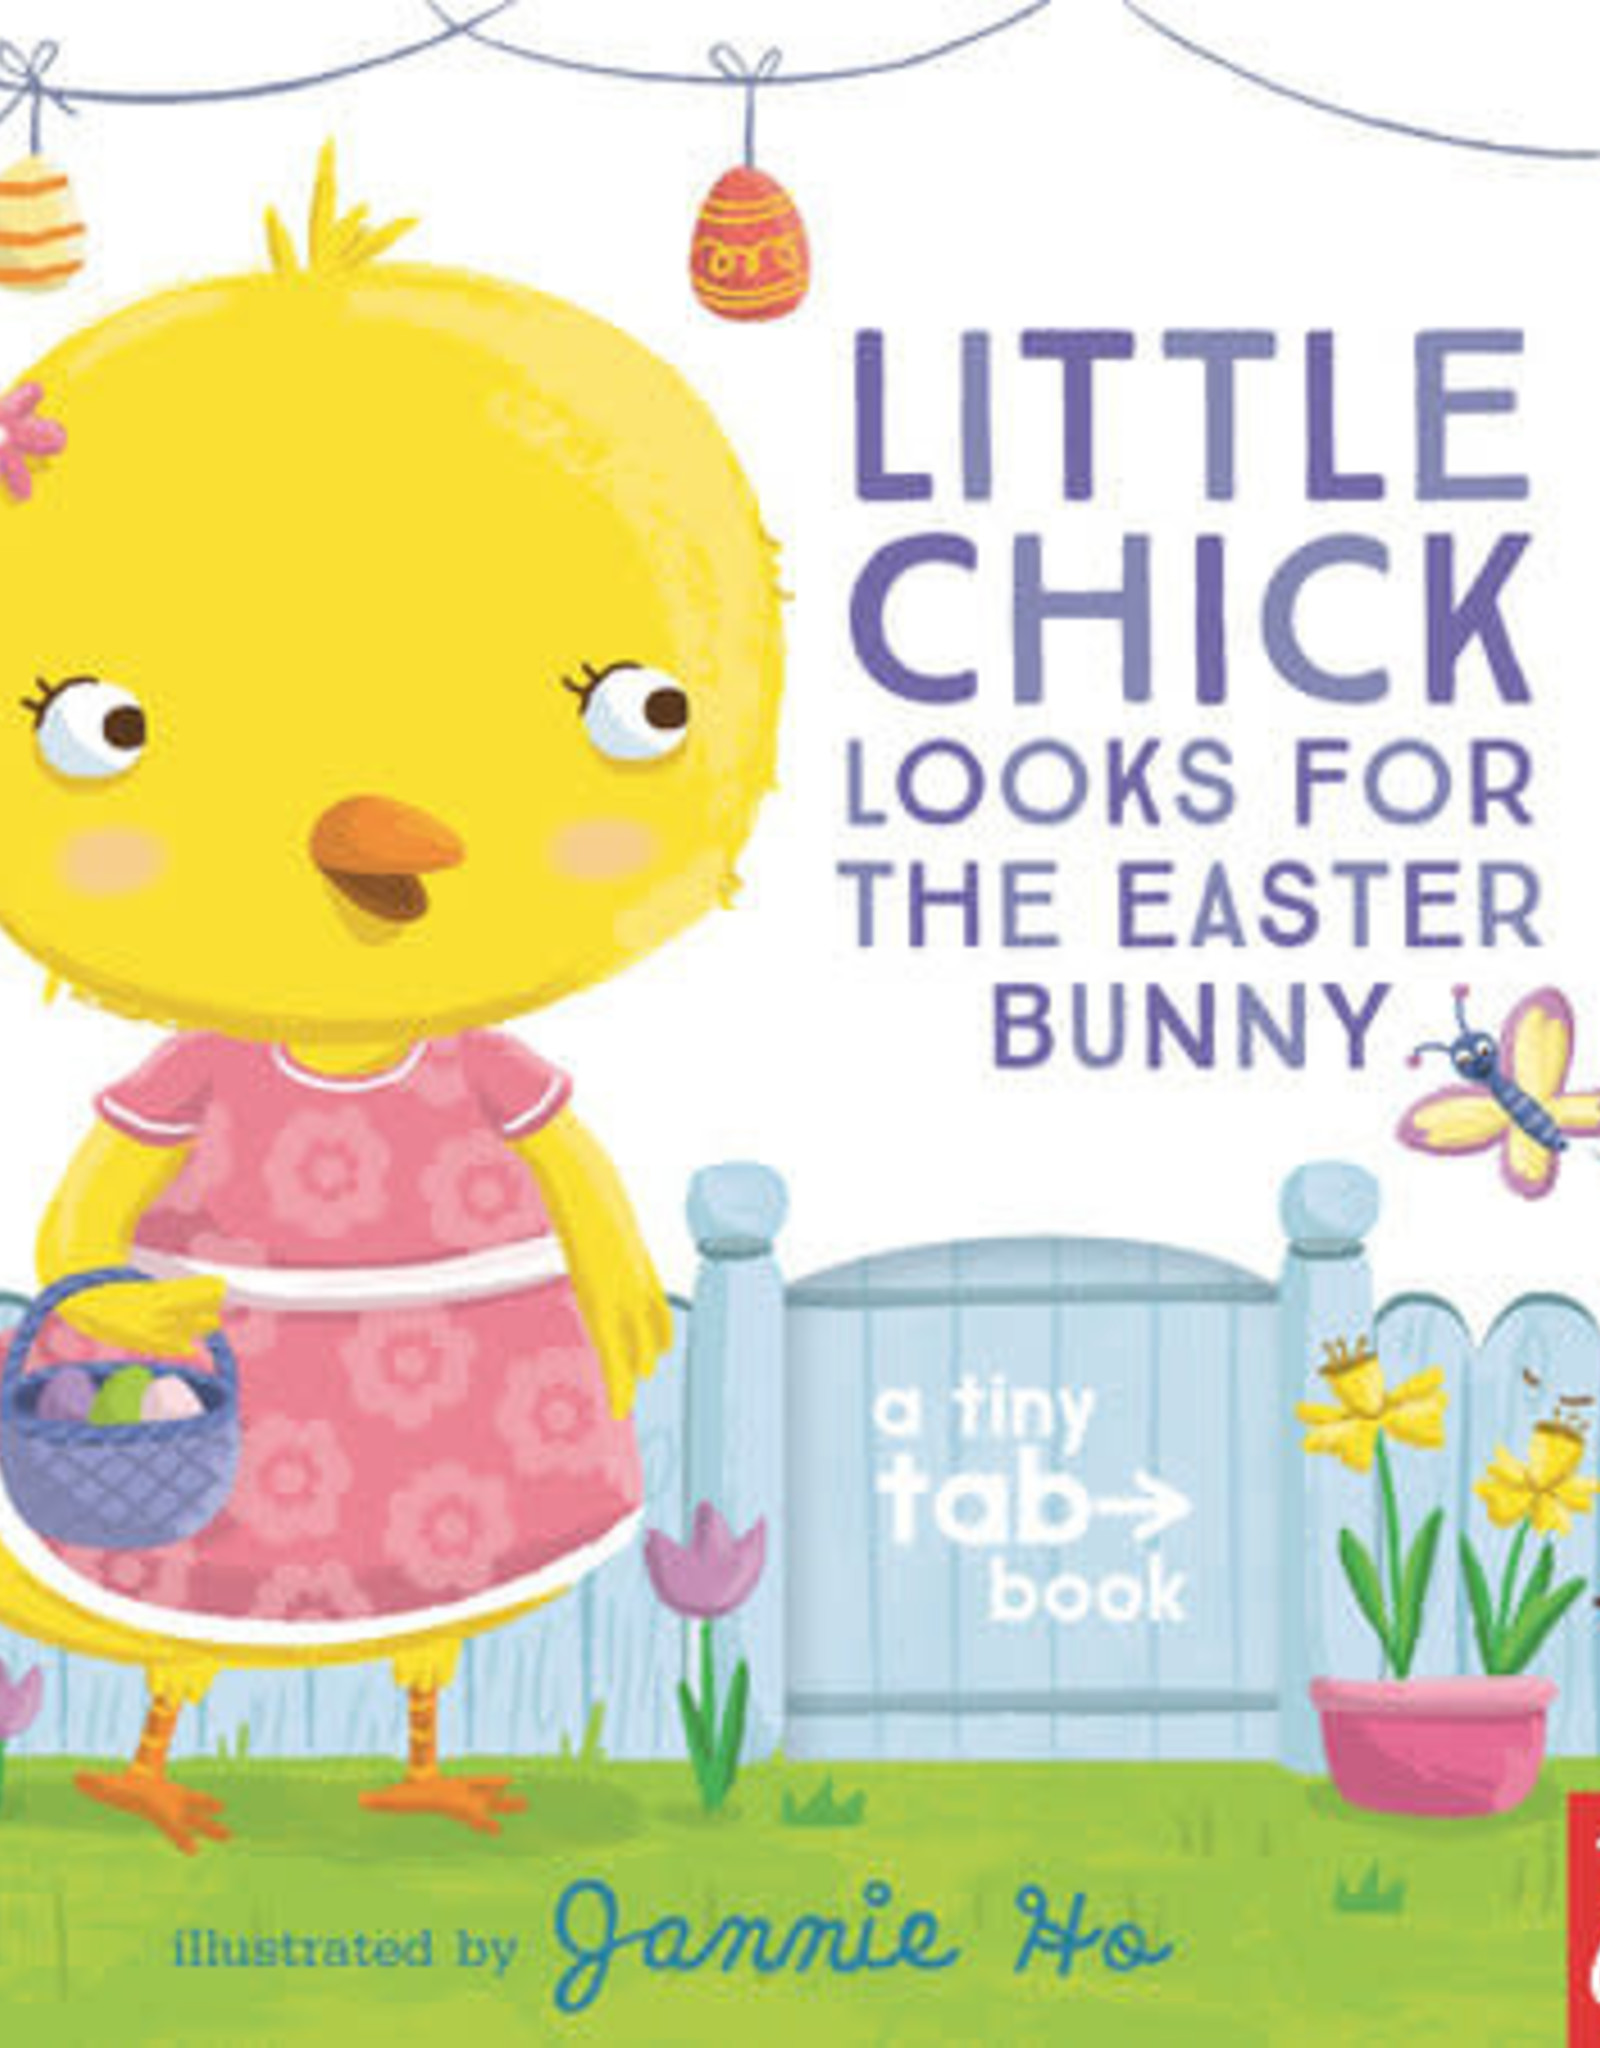 Little Chick Looks for the Easter Bunny